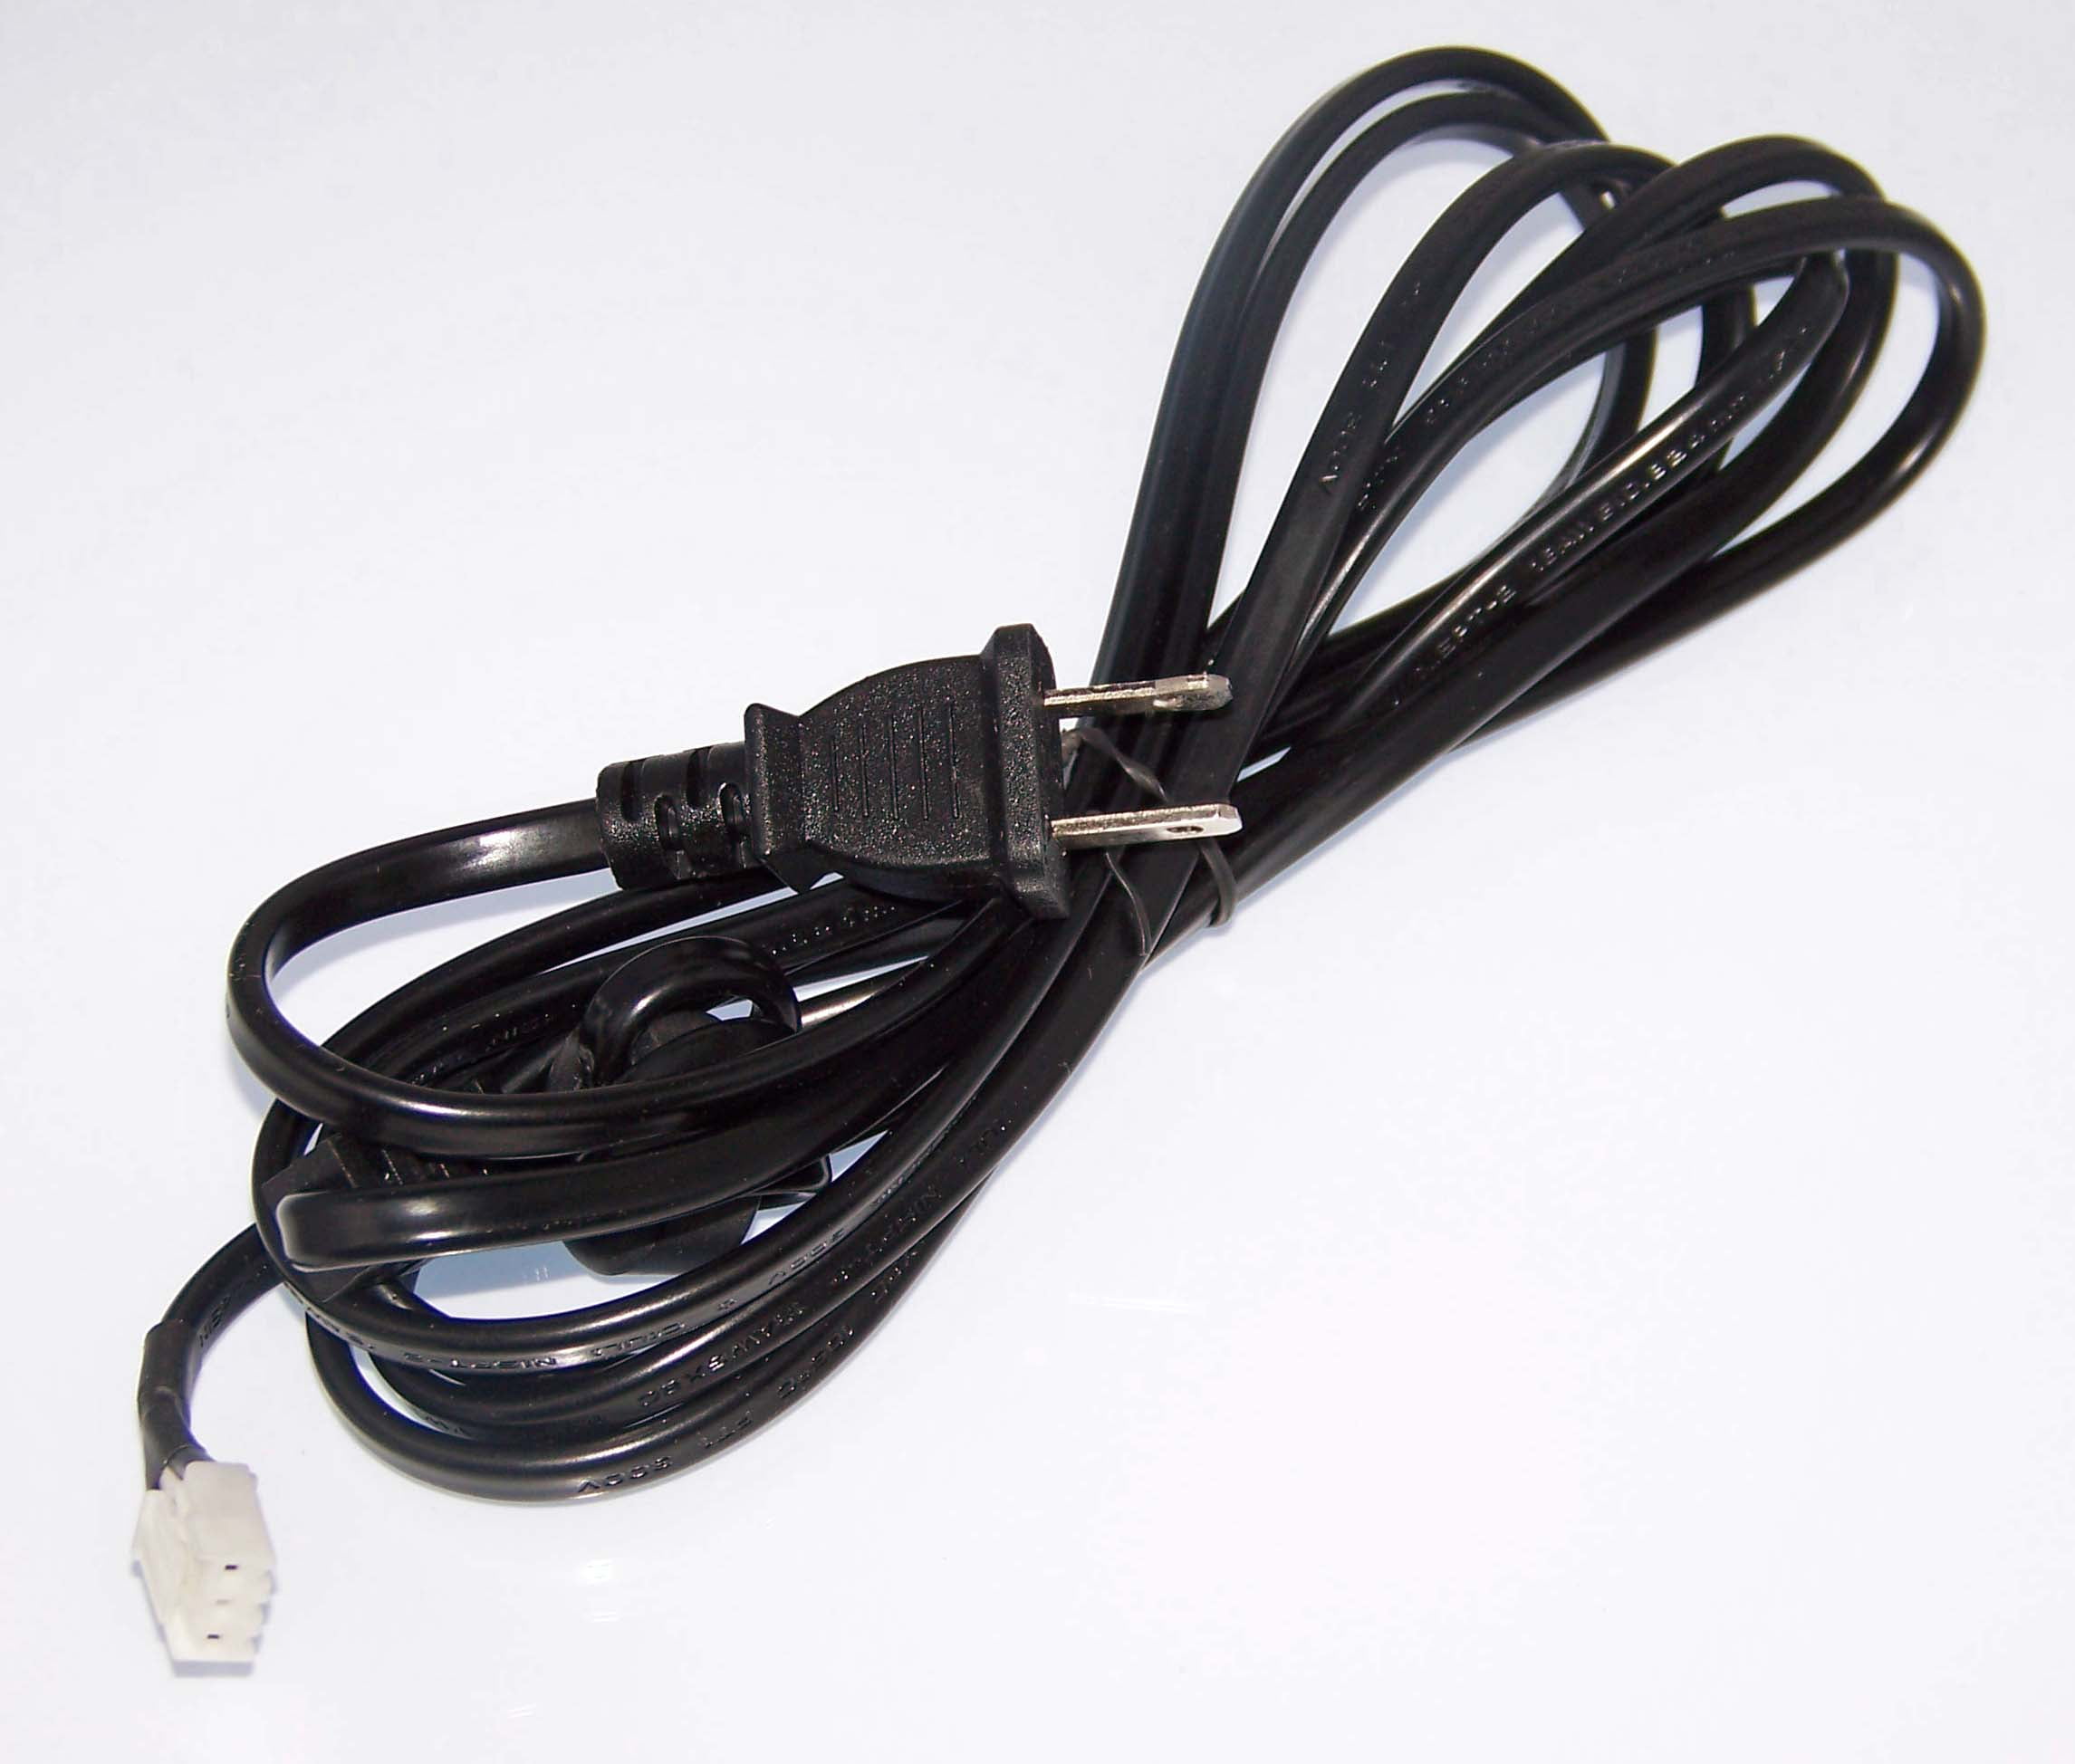 32D3000C OEM Haier Power Cord Cable USA Only Originally Shipped with LE24C2380A L24B2120 65E3550A LE32F2220B 32E3000B 